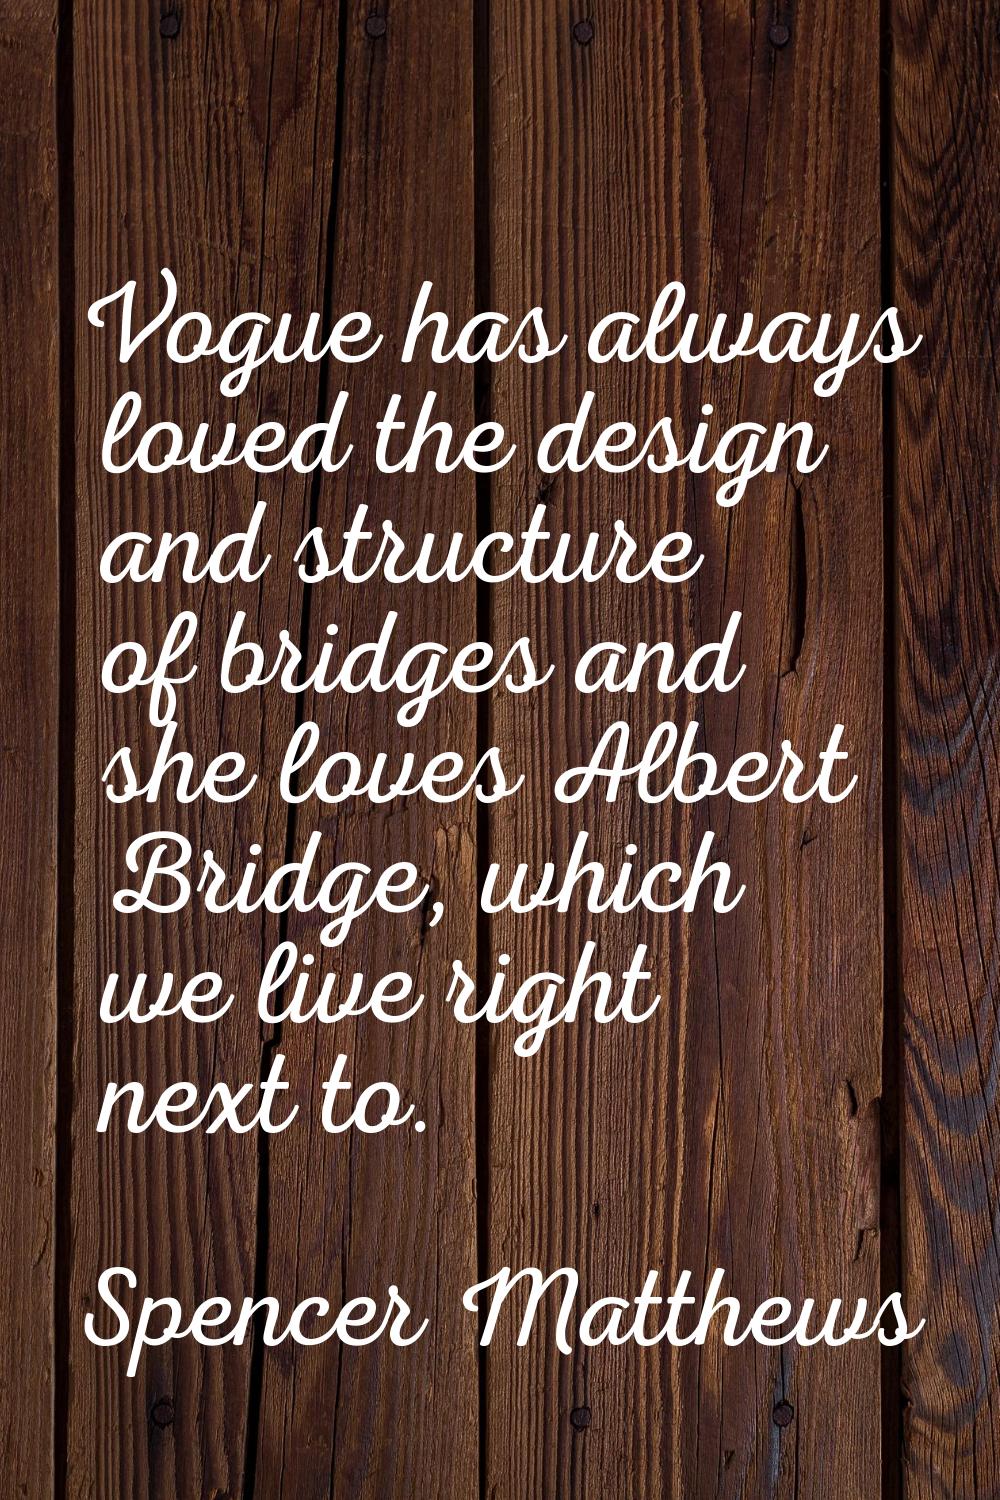 Vogue has always loved the design and structure of bridges and she loves Albert Bridge, which we li